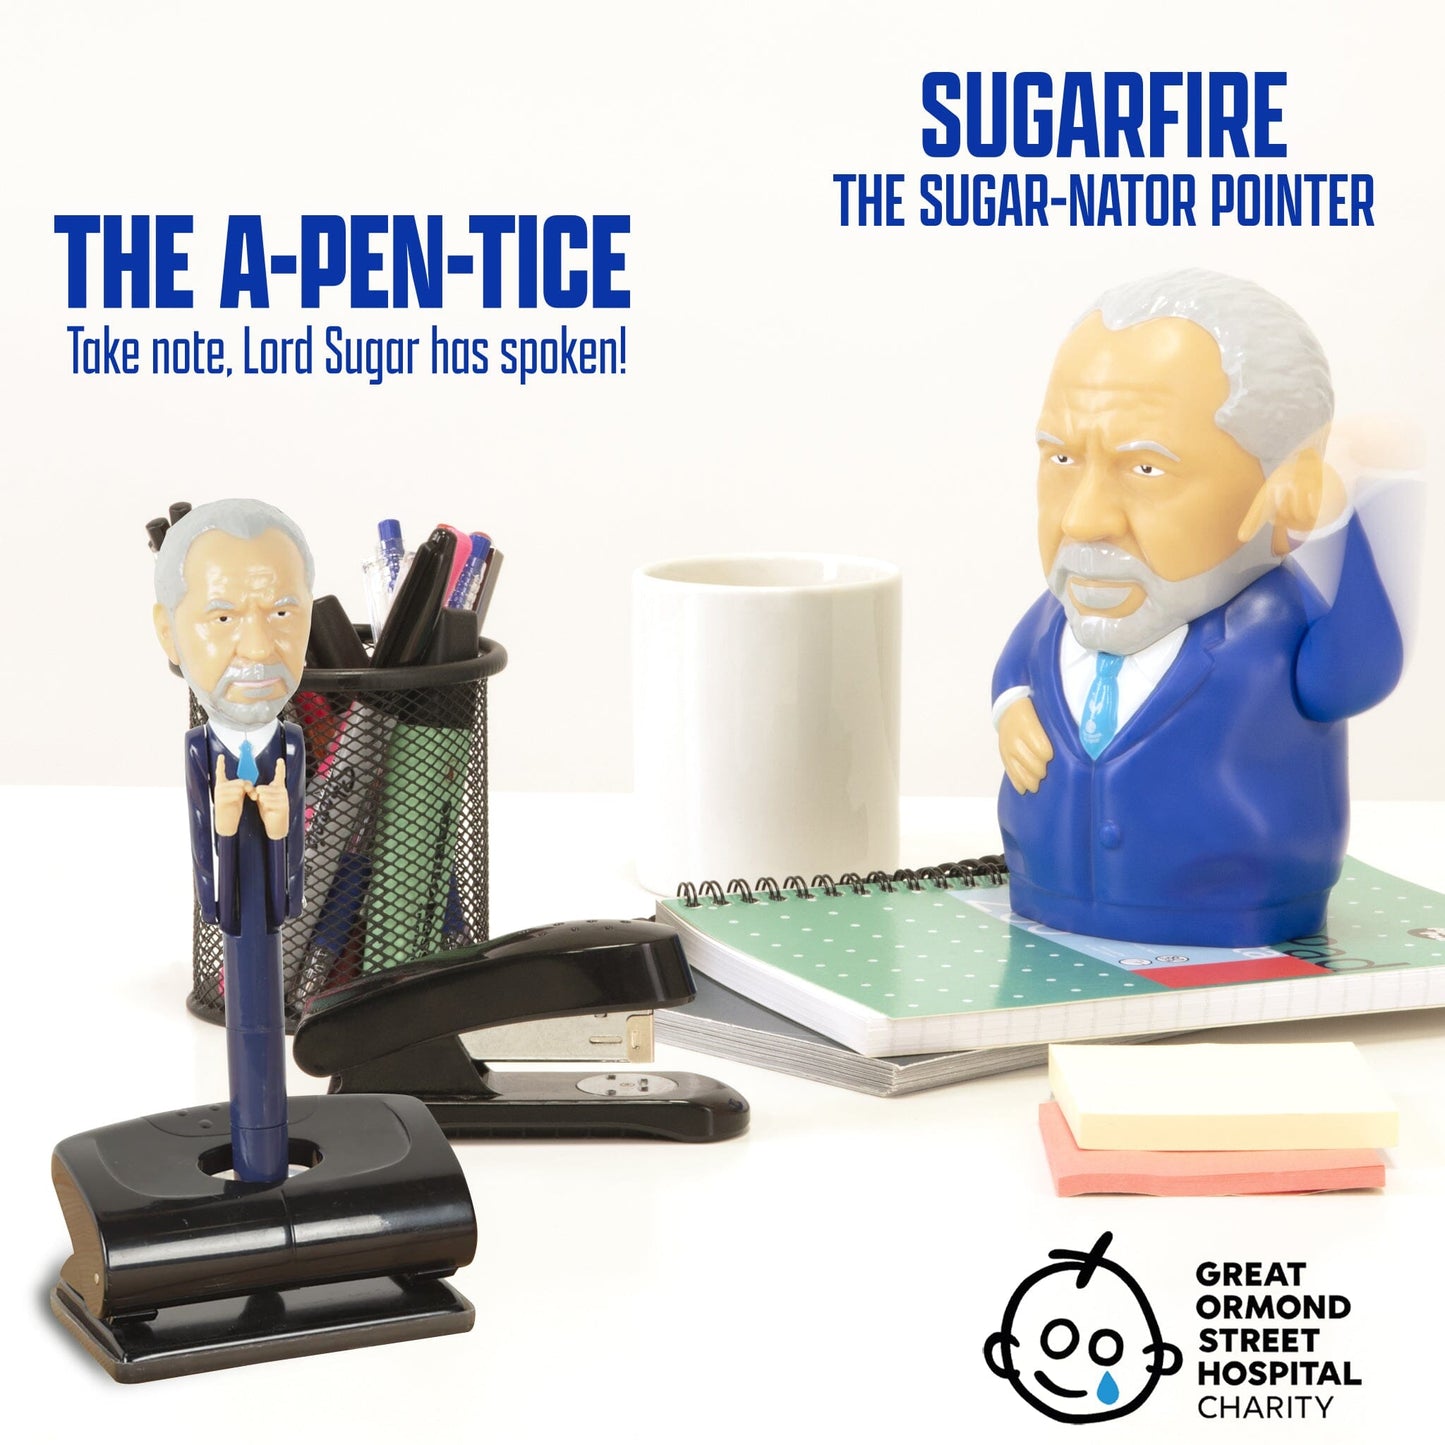 The A-PEN-TICE and SUGARFIRE Bundle